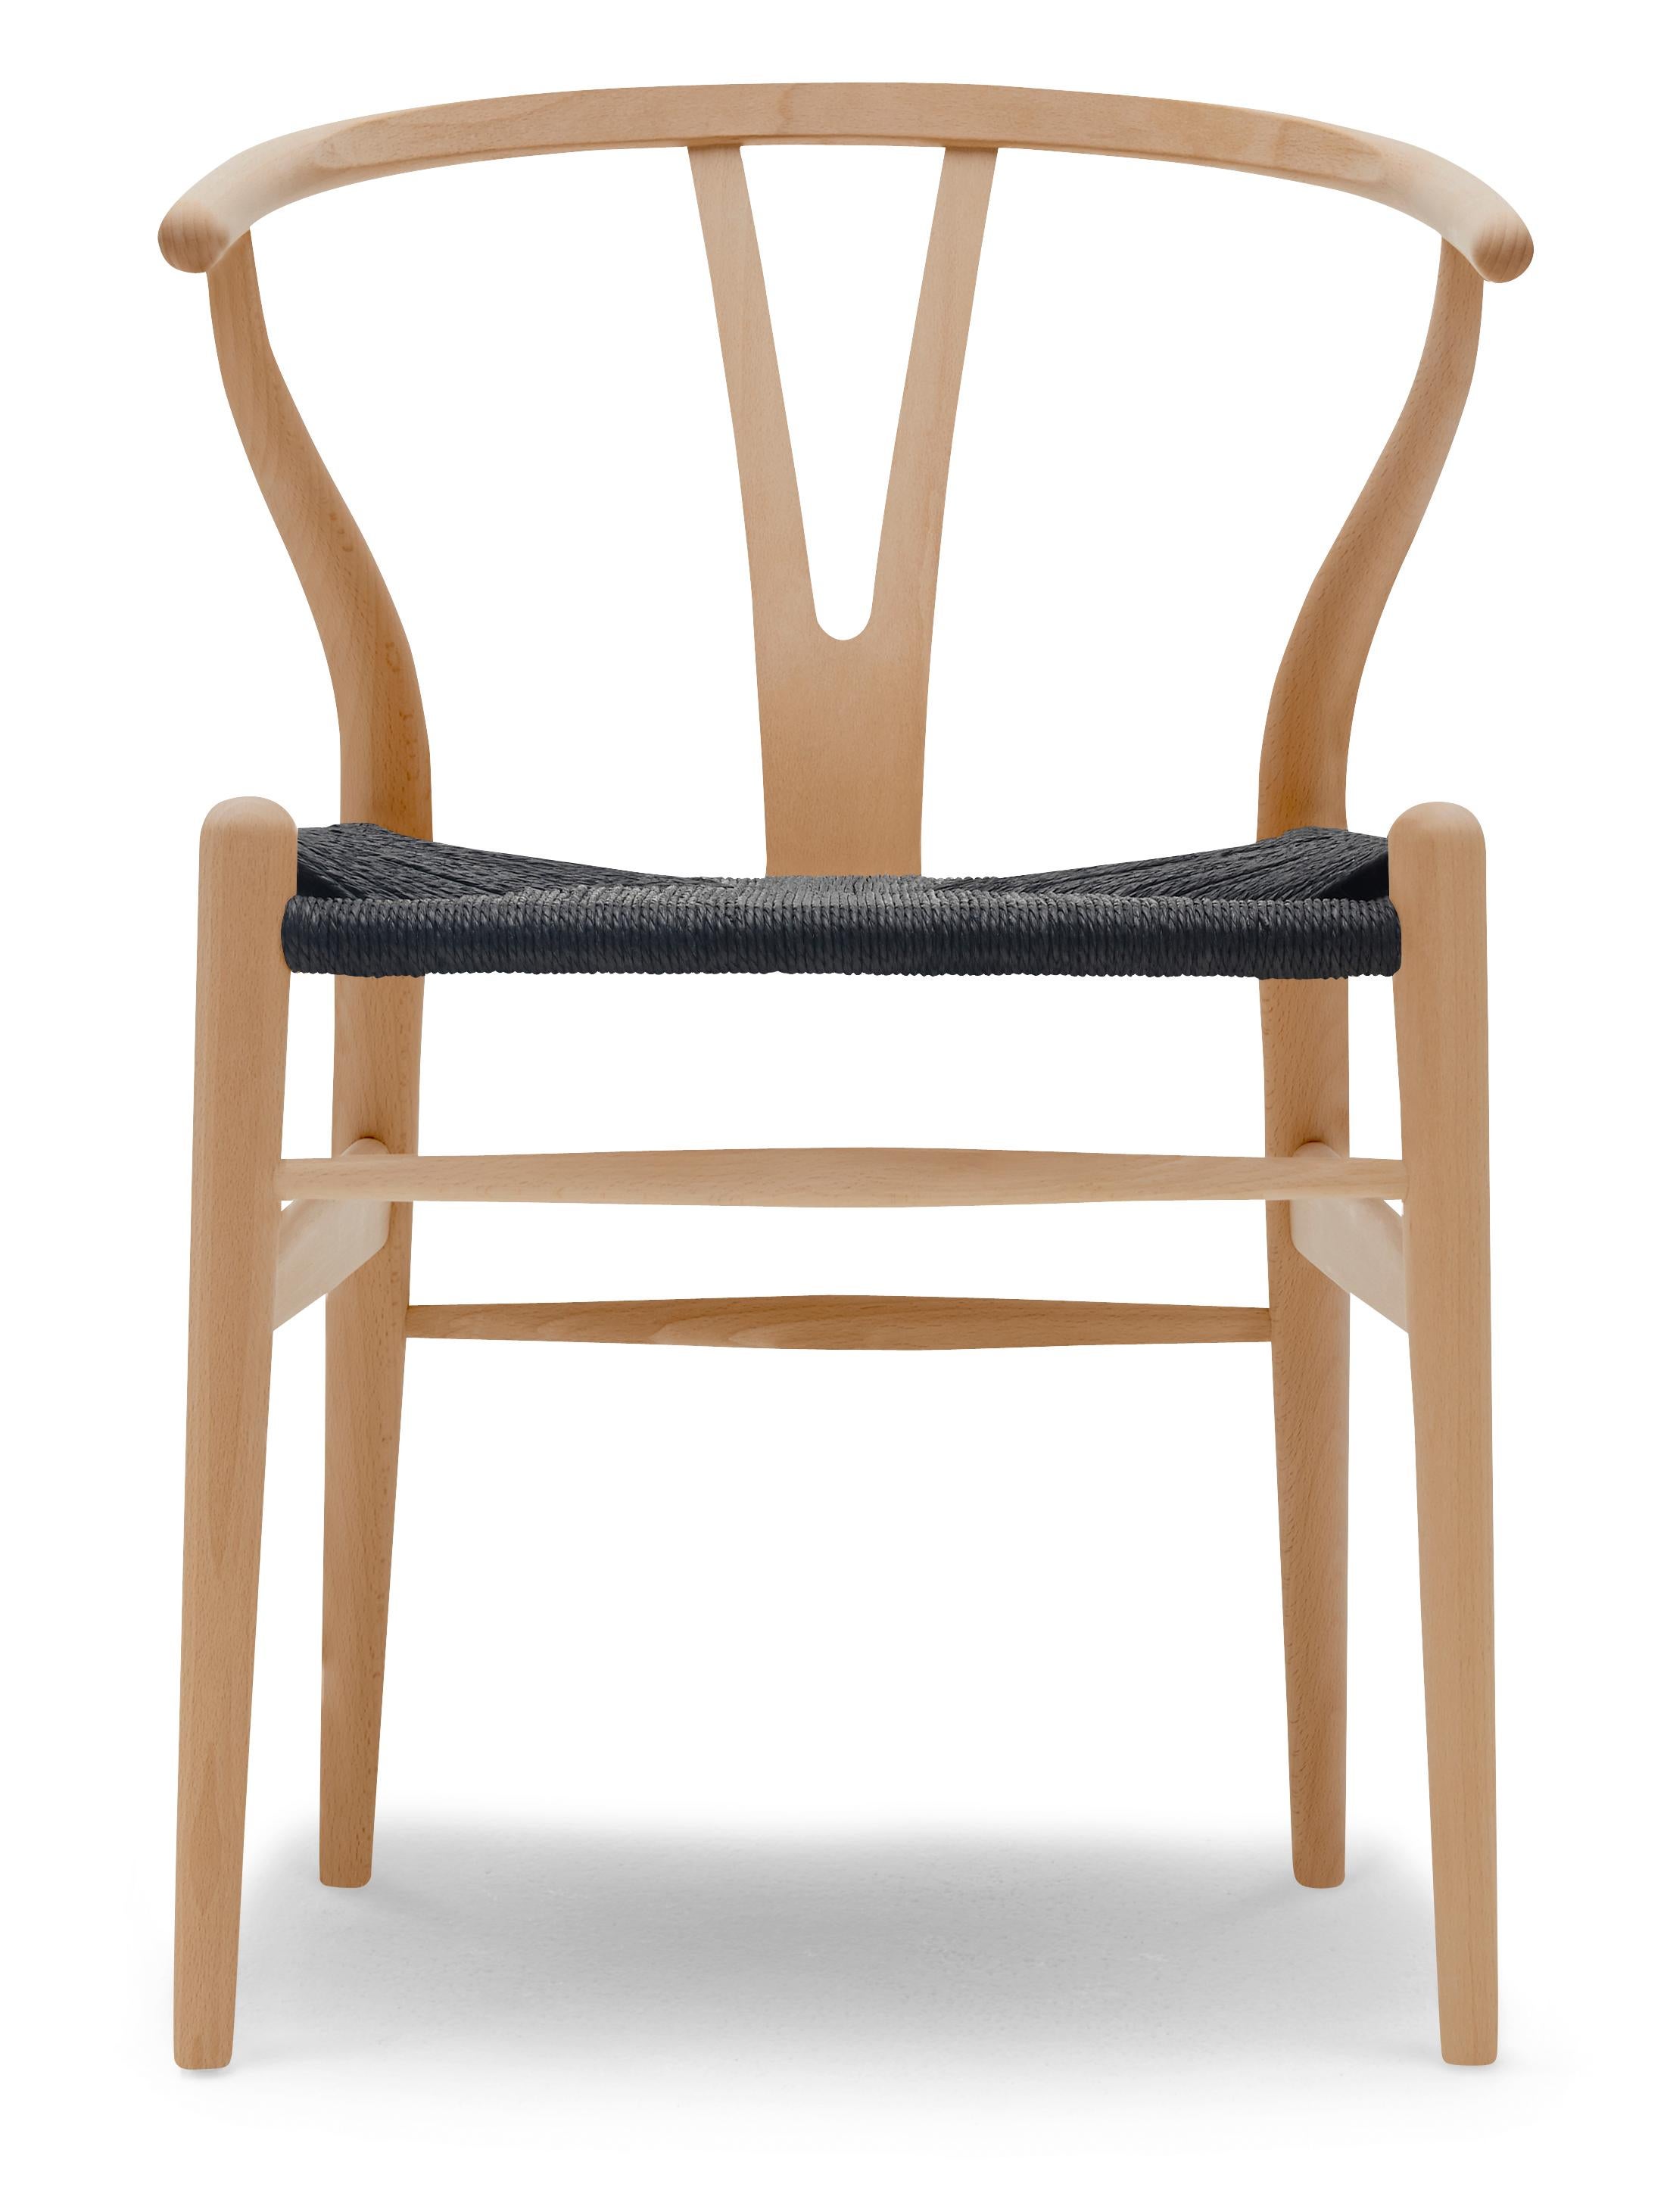 Brown (Beech Lacquer) CH24 Wishbone Chair in Wood Finishes with Black Papercord Seat by Hans J. Wegner